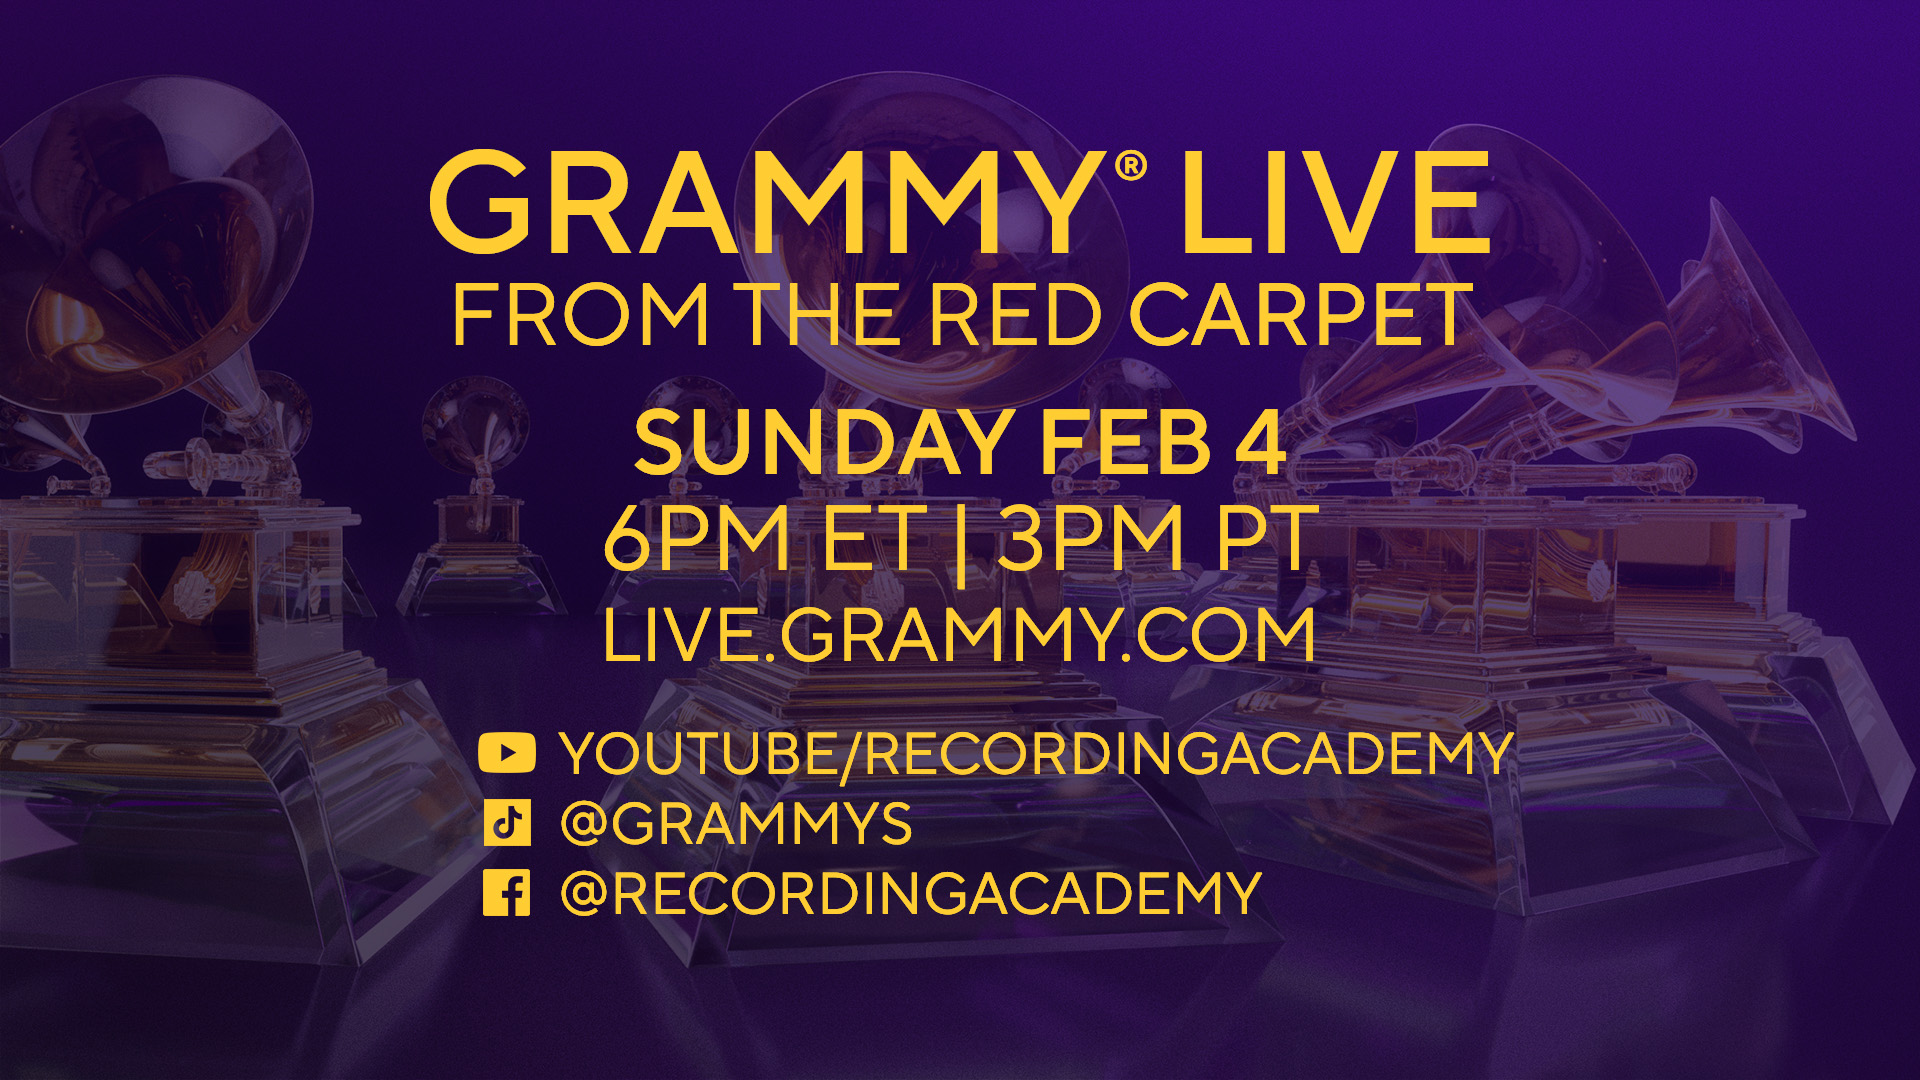 GRAMMY Live From The Red Carpet Airs Sunday, Feb. 4: Save The Date